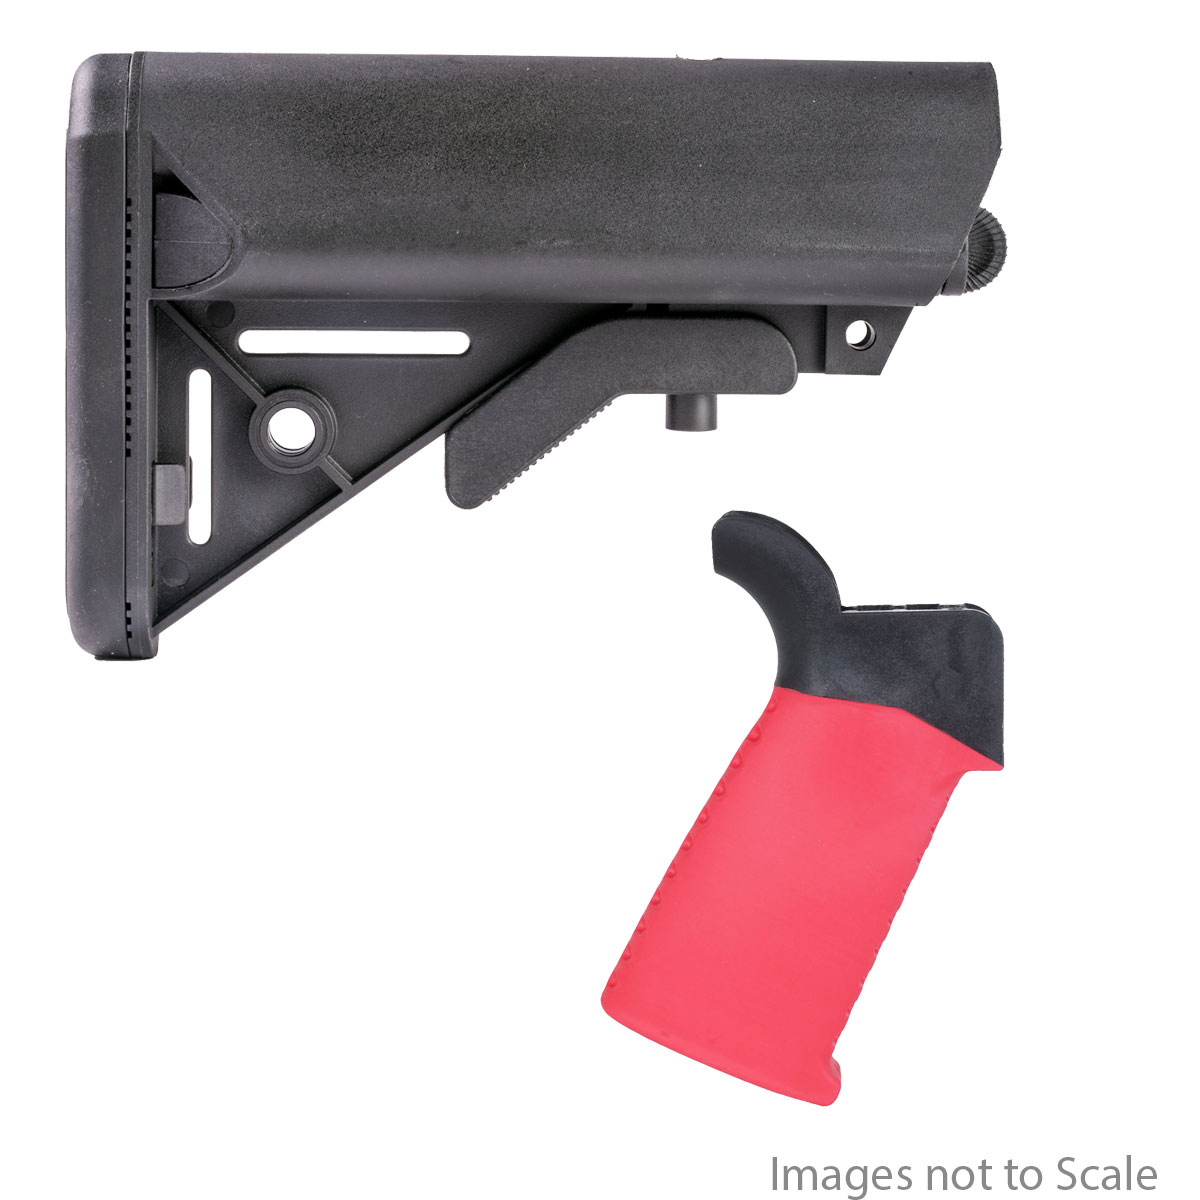 Furniture Upgrade Kit: Team Accessories Corp AR15 Grip Window Grip Flared Smooth/Ribbed Red + Gauntlet Arms SOPMOD Style Collapsible Stock with Storage Compartments